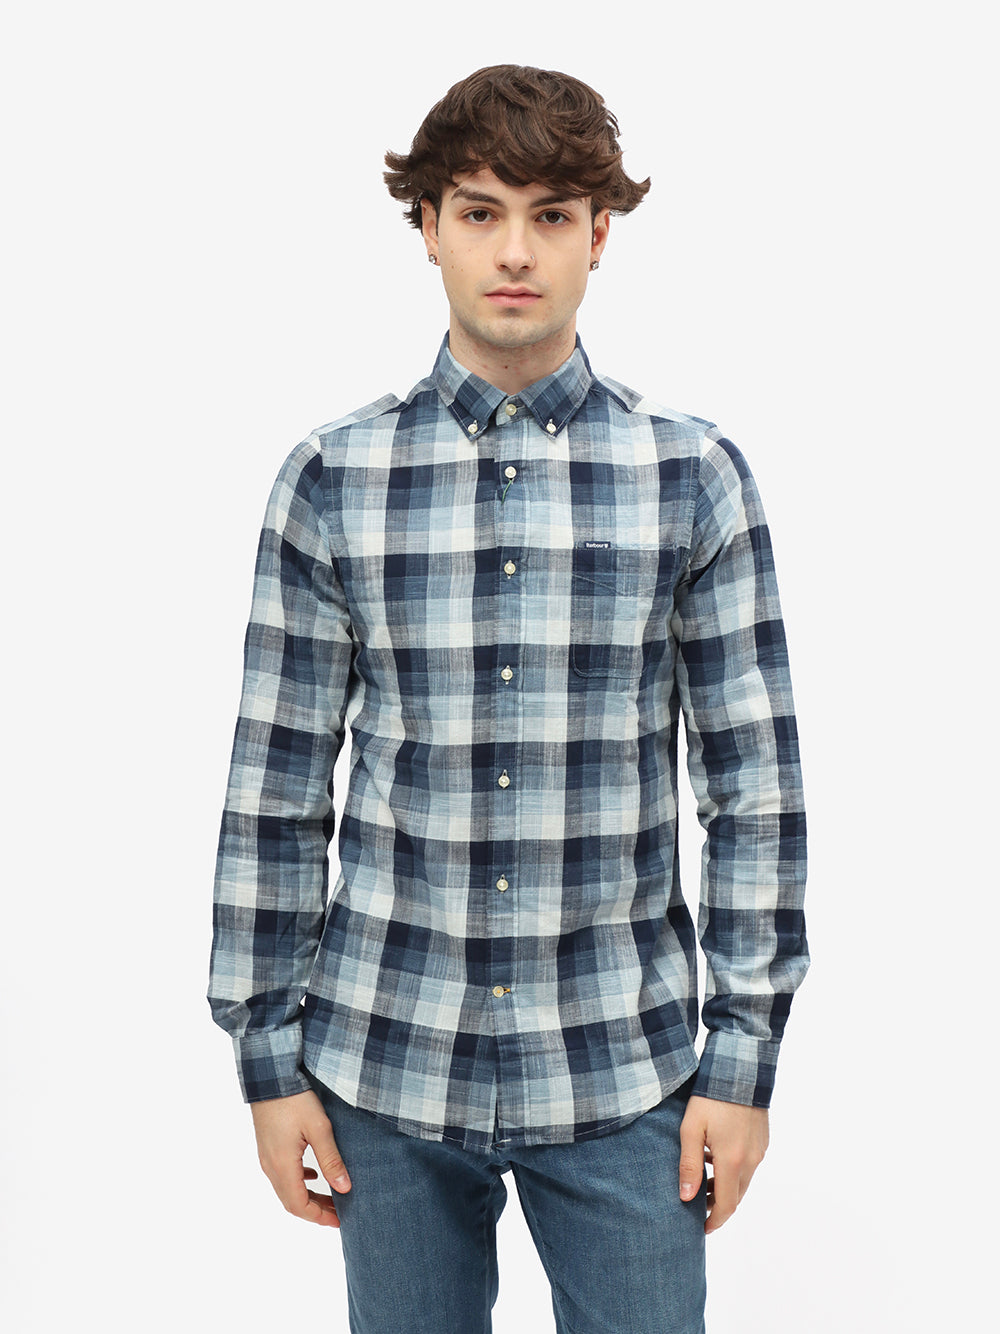 Barbour Camicia Uomo HILLROAD TAILORED SHIRT-Navy